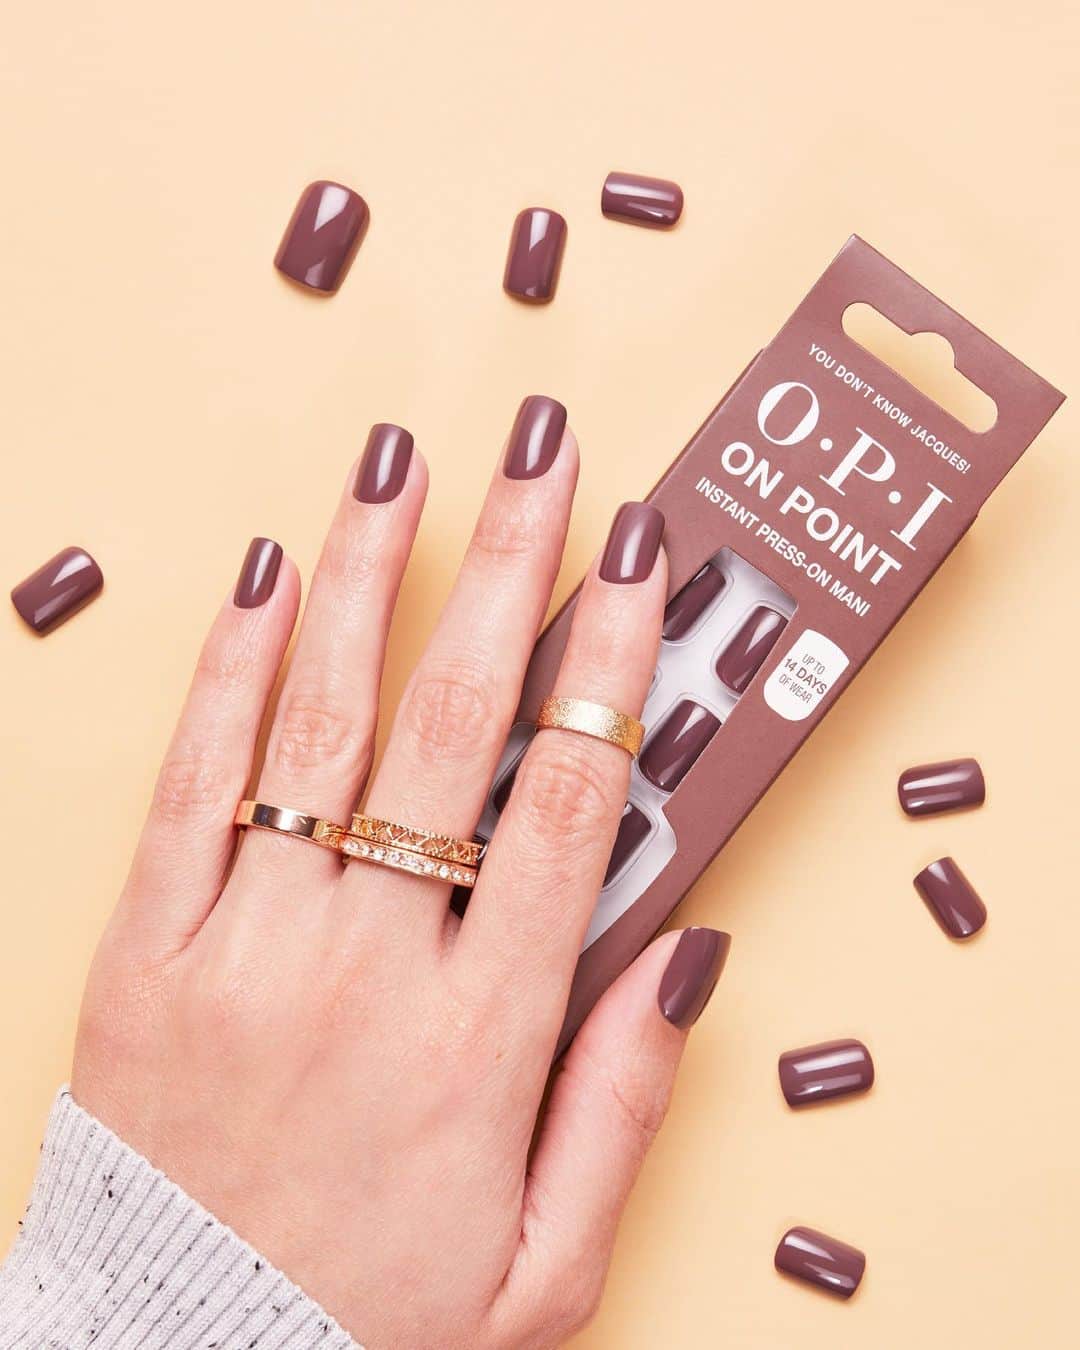 OPIのインスタグラム：「A set for every mood. 💅  Whether it's for 14 days or 1 day, you'll never miss a chance to express your unique self with OPI On Point.  Now available online and at select drugstores. 🛒  #OPI #OPIObsessed #OPIOnPoint #PressOnNails」